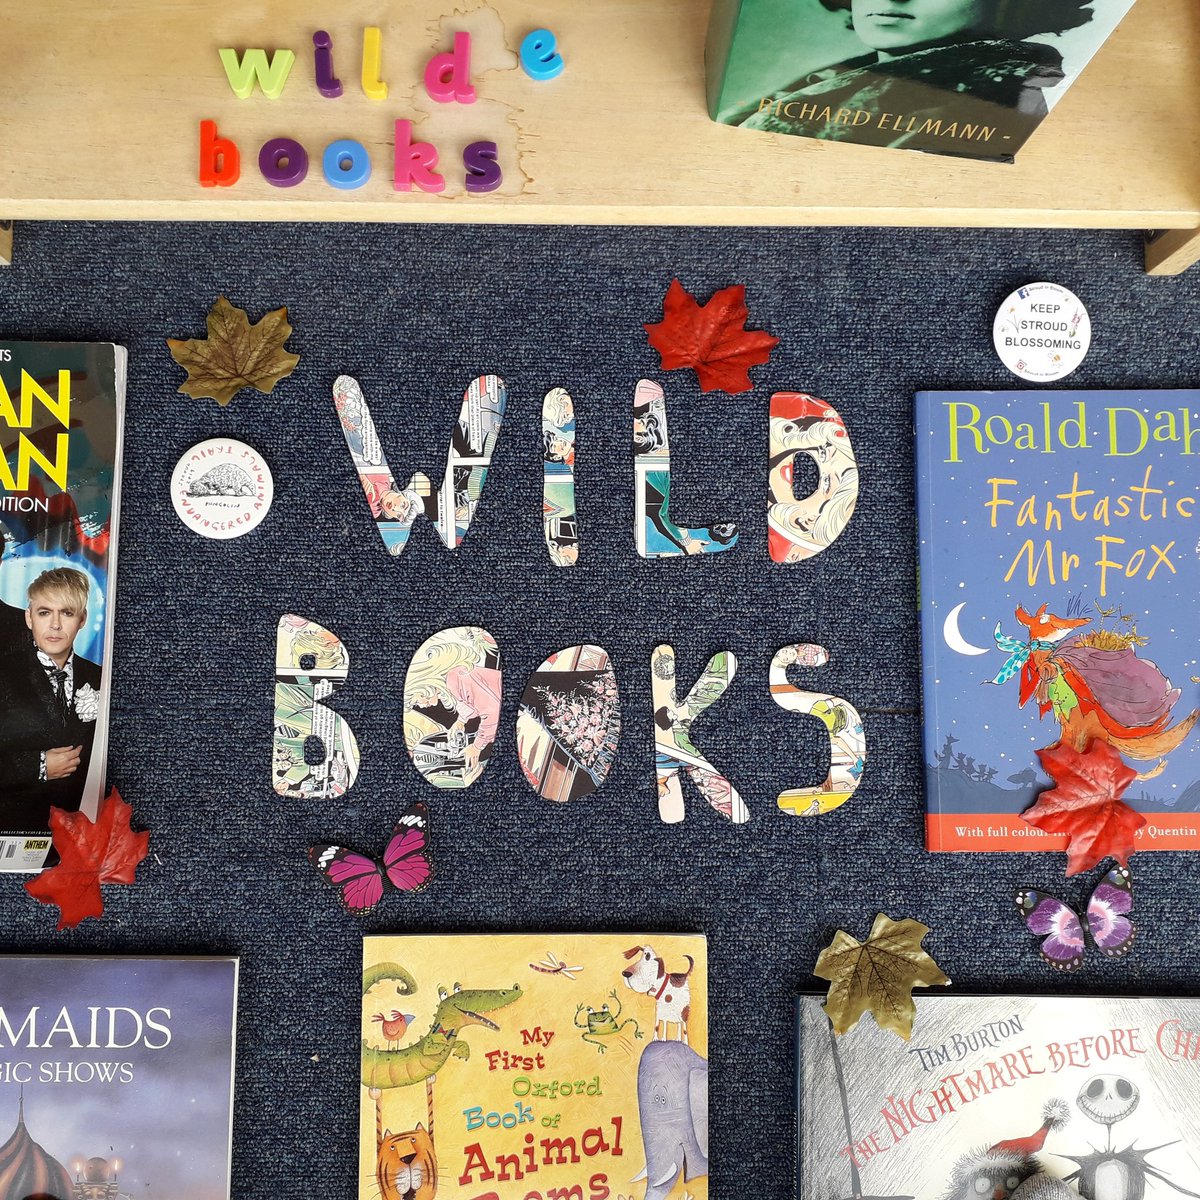 Just putting the finishing touches to our 'Wild Books' display for the Goodwill Evening Window Competition 🌲📚🌞 #Stroud #stroudgoodwillevening #shoplocal  #buysecondhand #bookshop